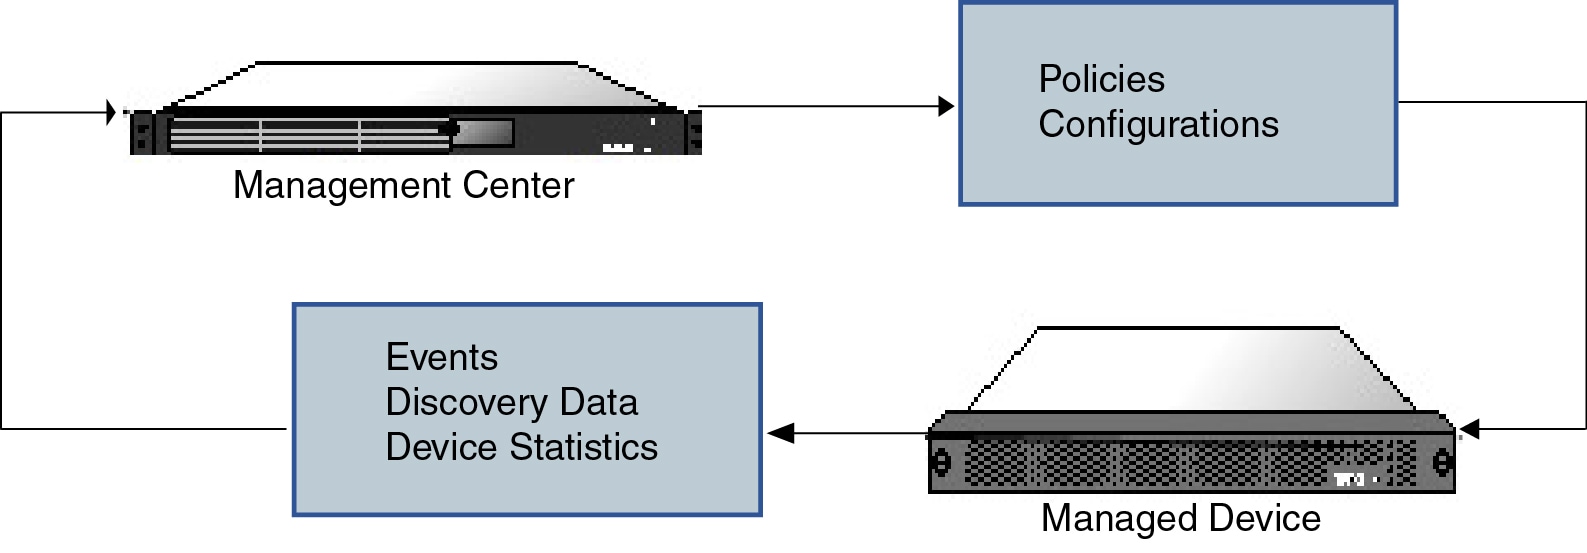 Diagram illustrating information passed between a management center and its managed devices. Policy and configuration information is passed from the management center to the managed devices. Events, discovery data, and device statistics are passed from the managed devices to the management center.